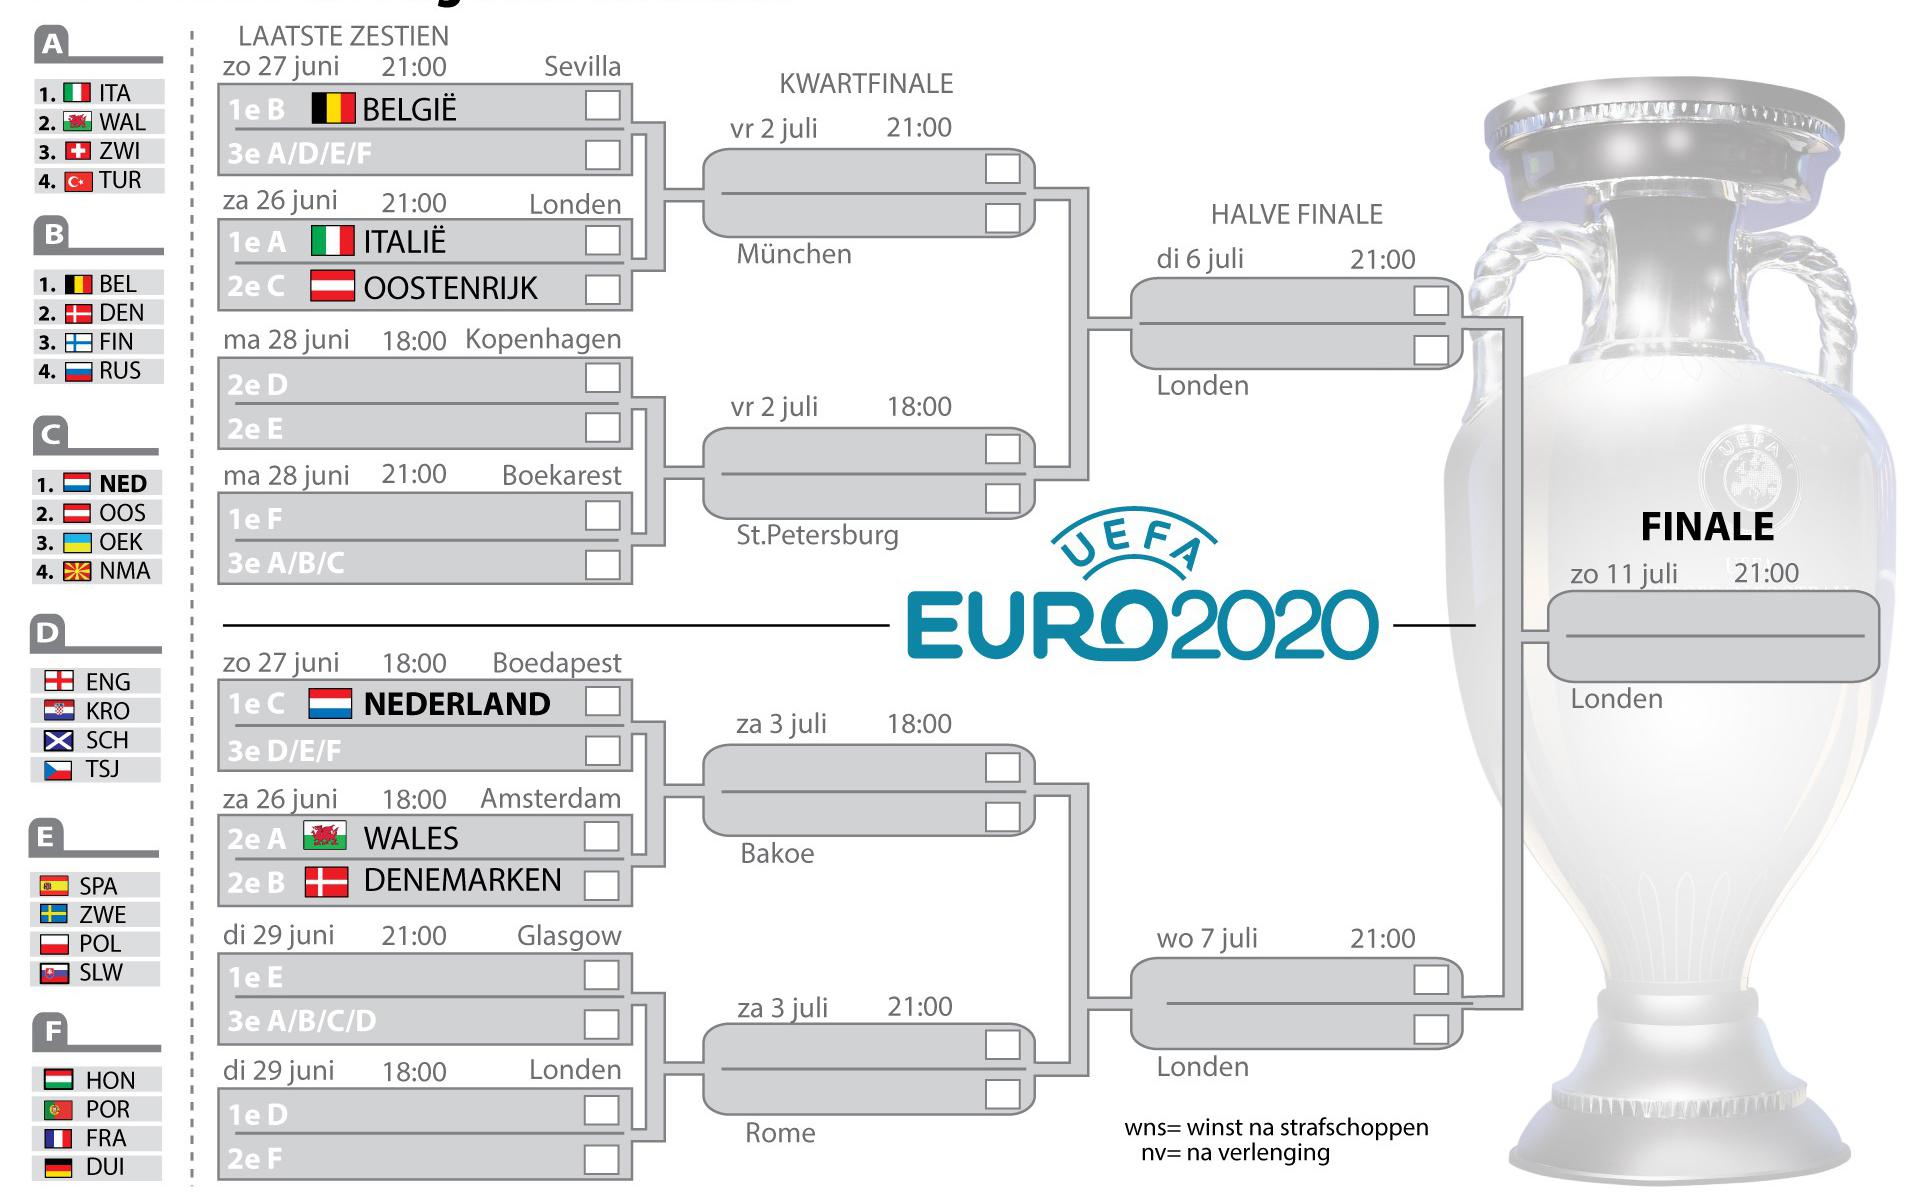 This is the road to Wembley.  Switzerland ranks first for sure in following the European Football Championship.  England and the Czech Republic have had enough of a draw in London